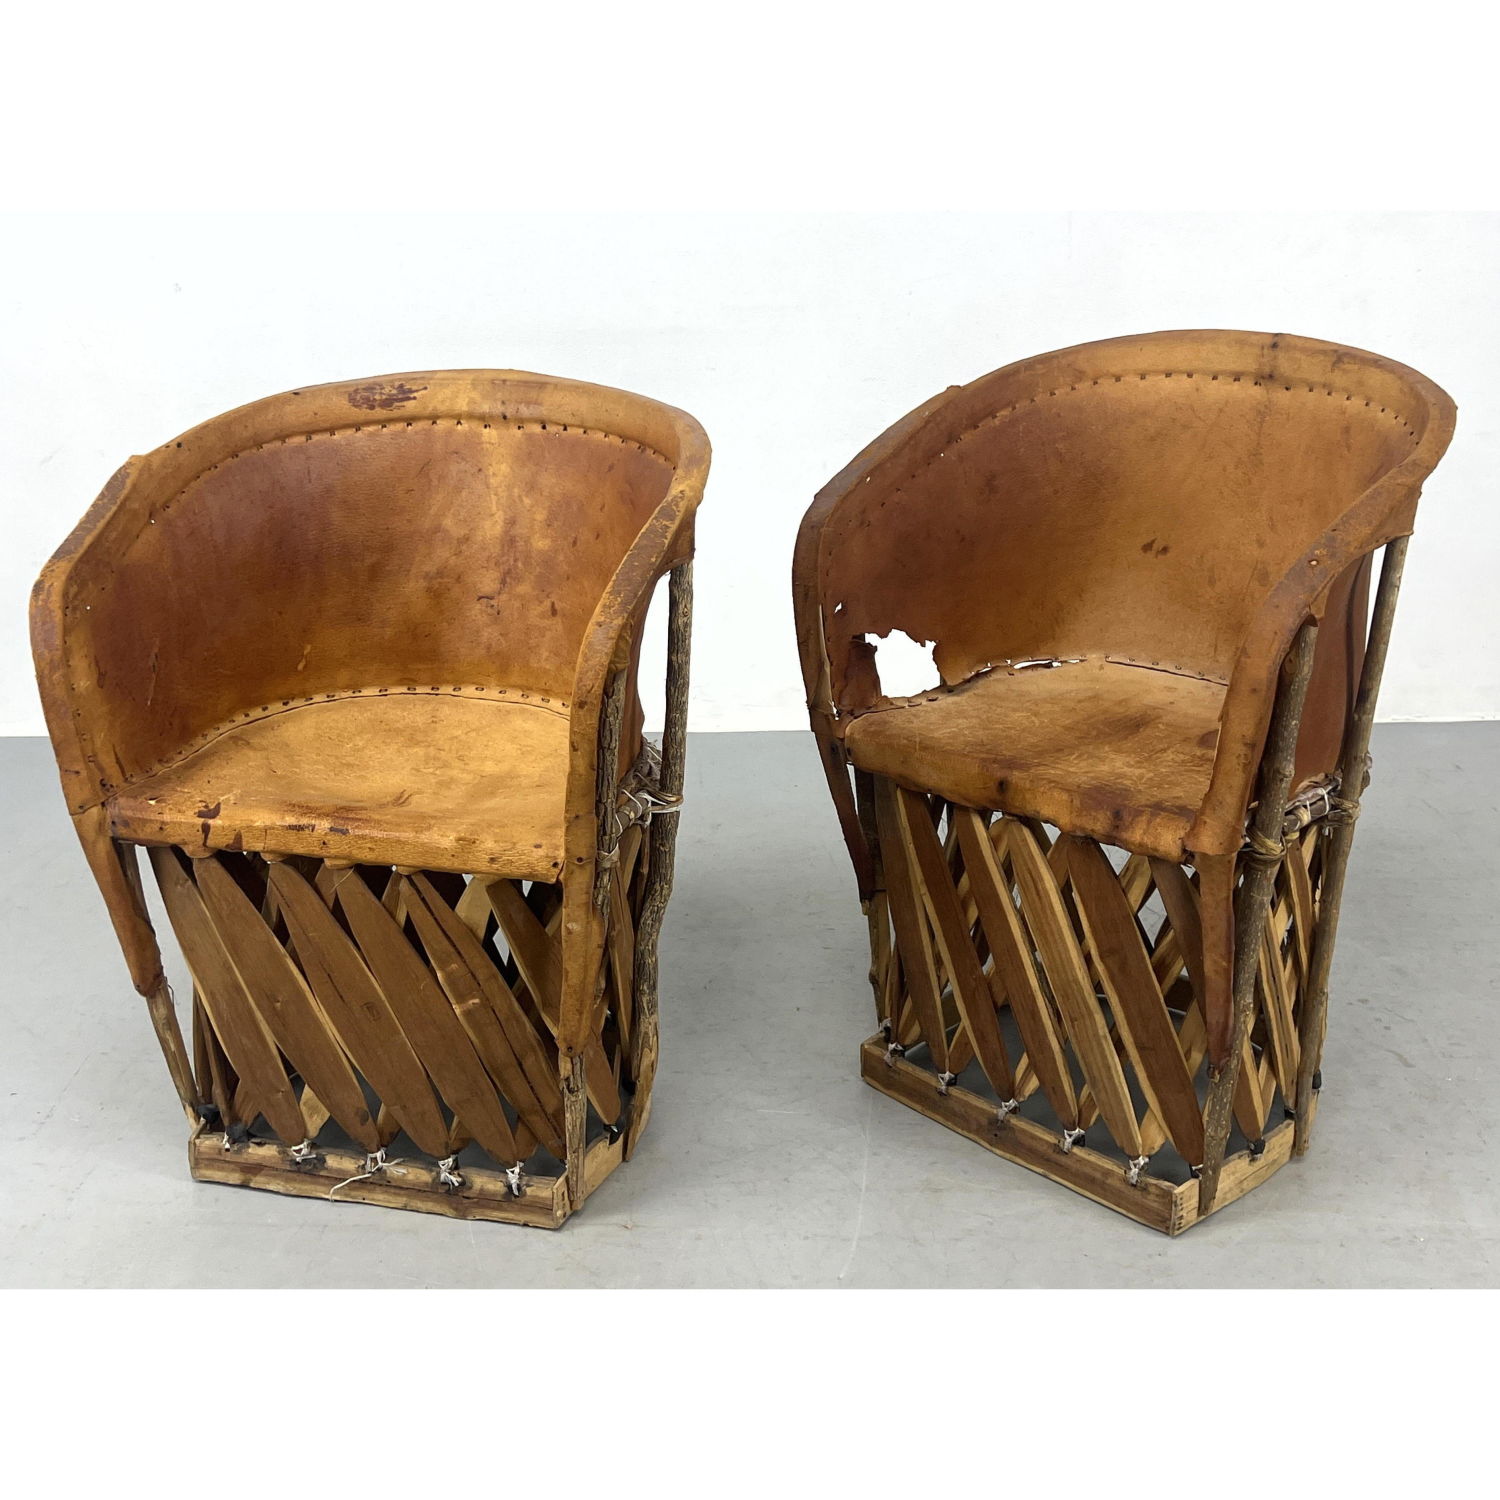 Pr Mexican Leather Lounge Chairs.